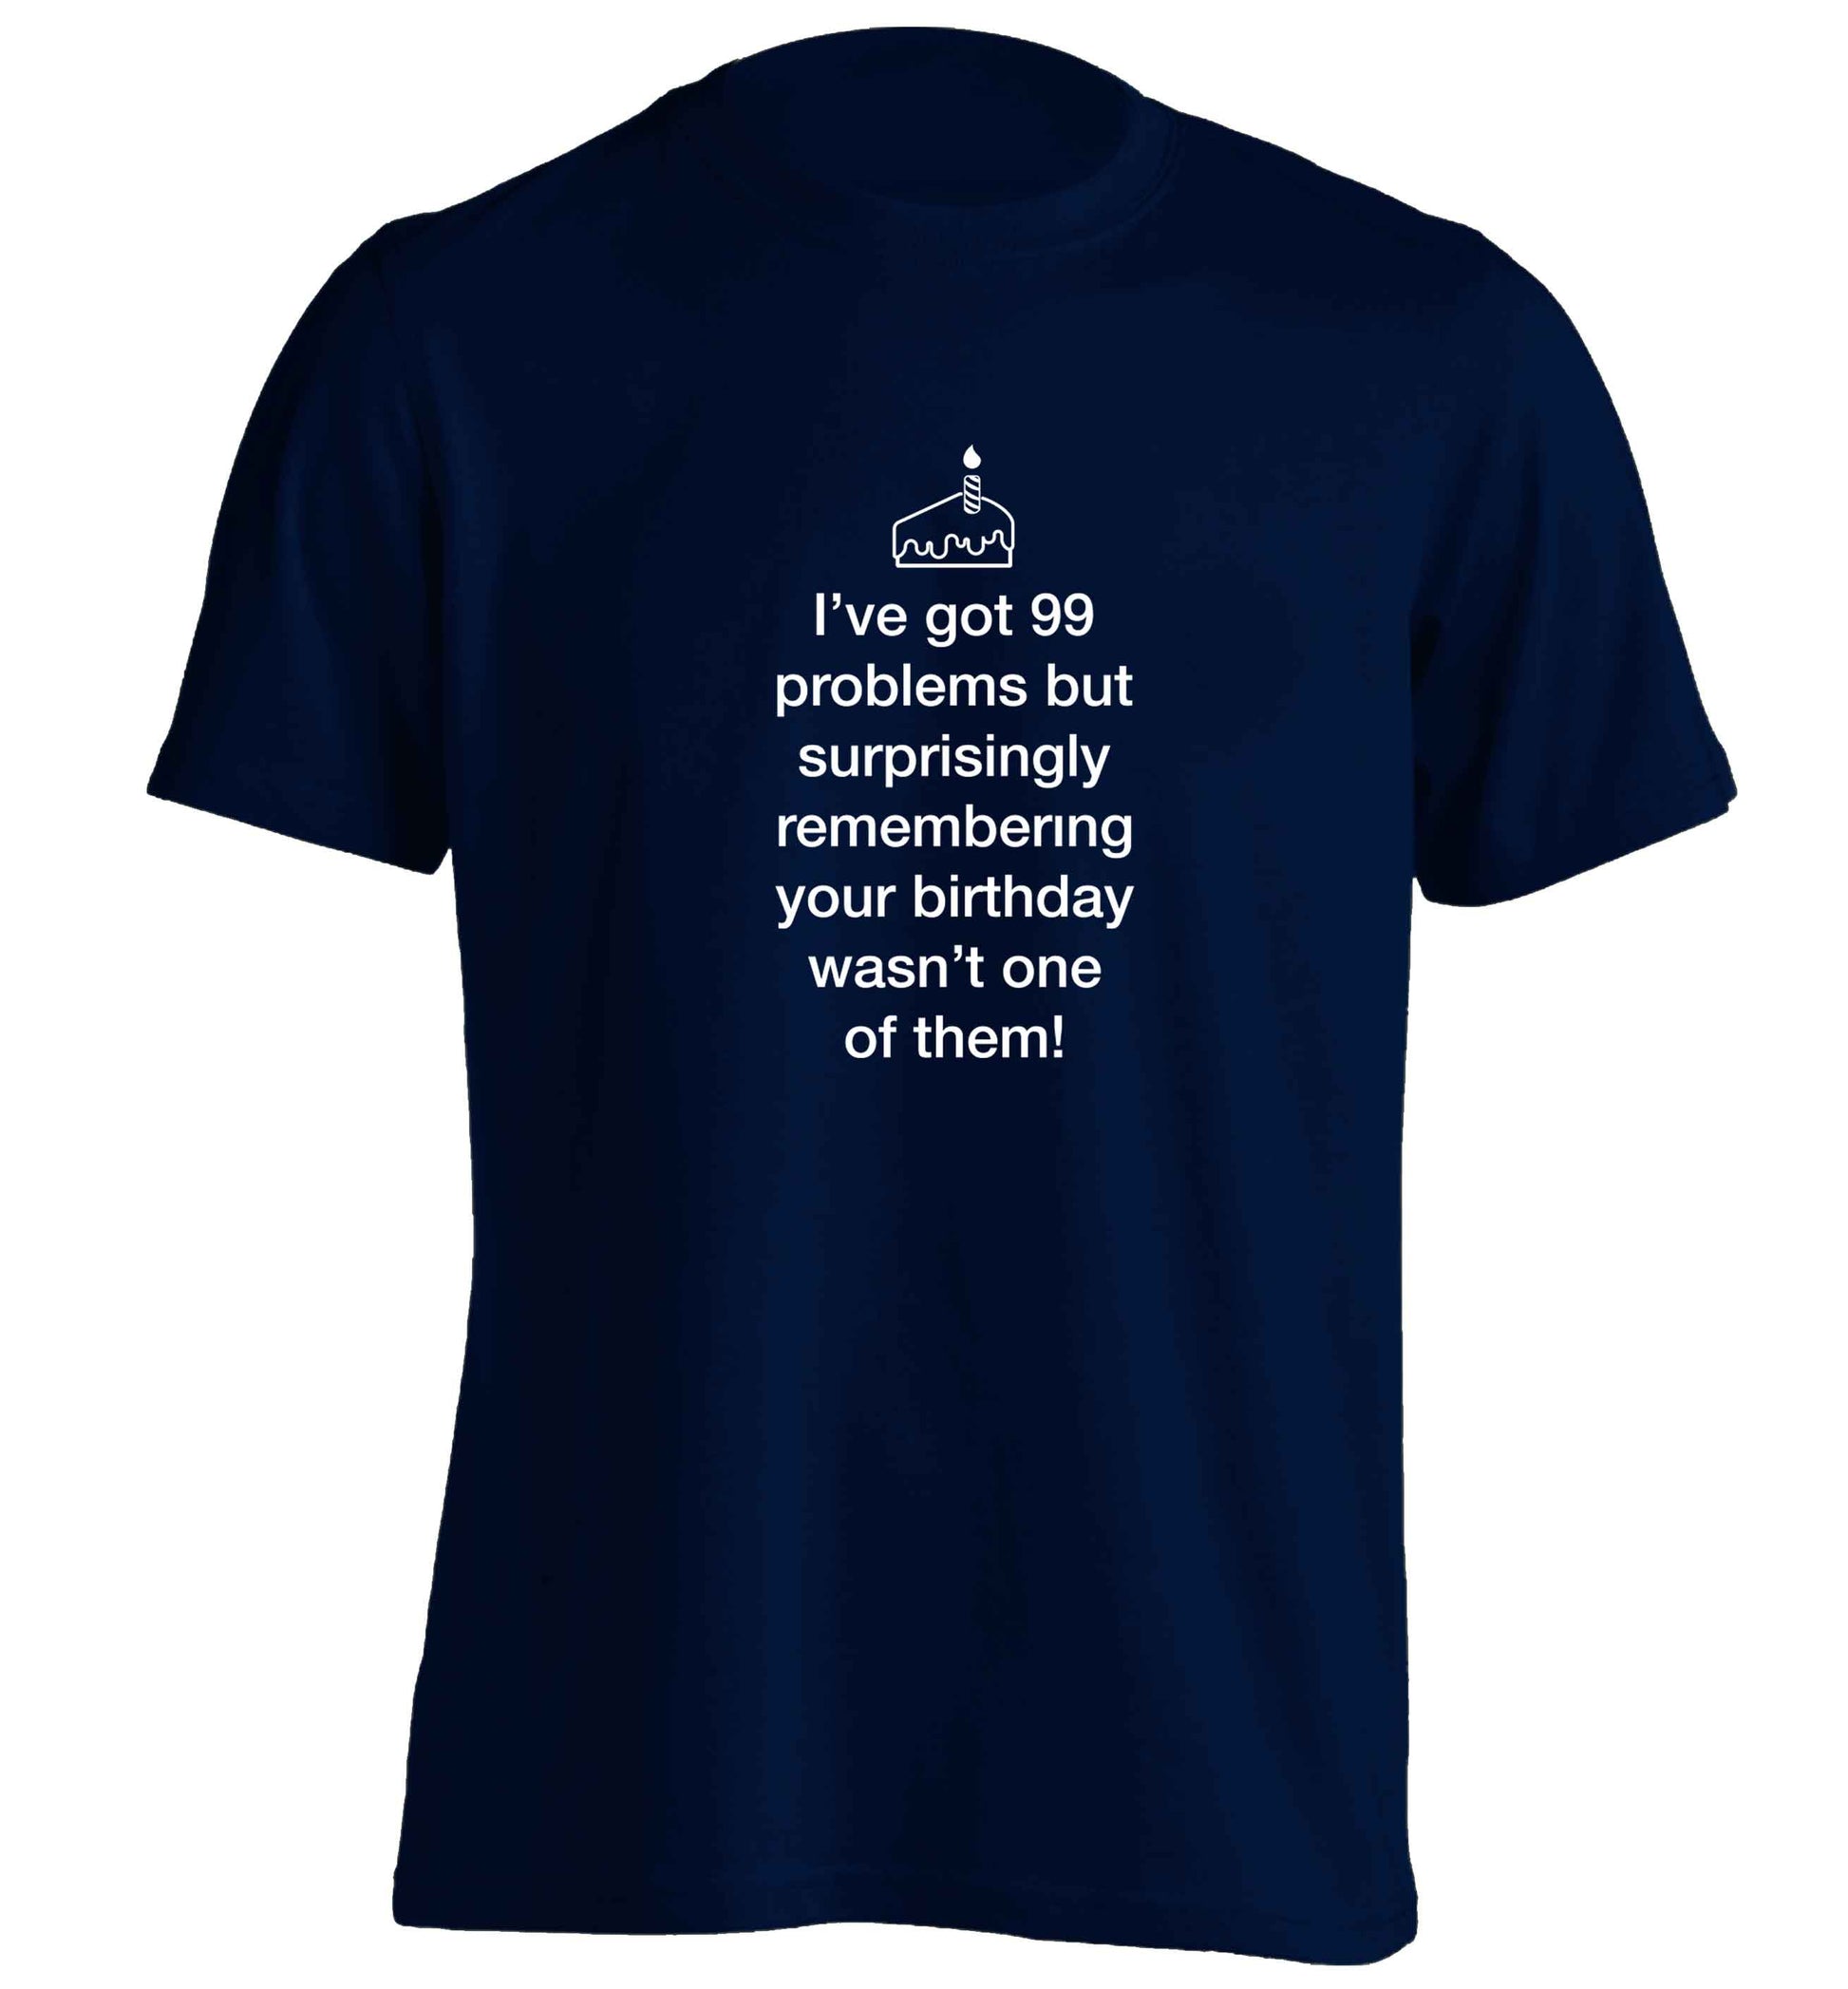 I've got 99 problems but surprisingly remembering your birthday wasn't one of them! adults unisex navy Tshirt 2XL